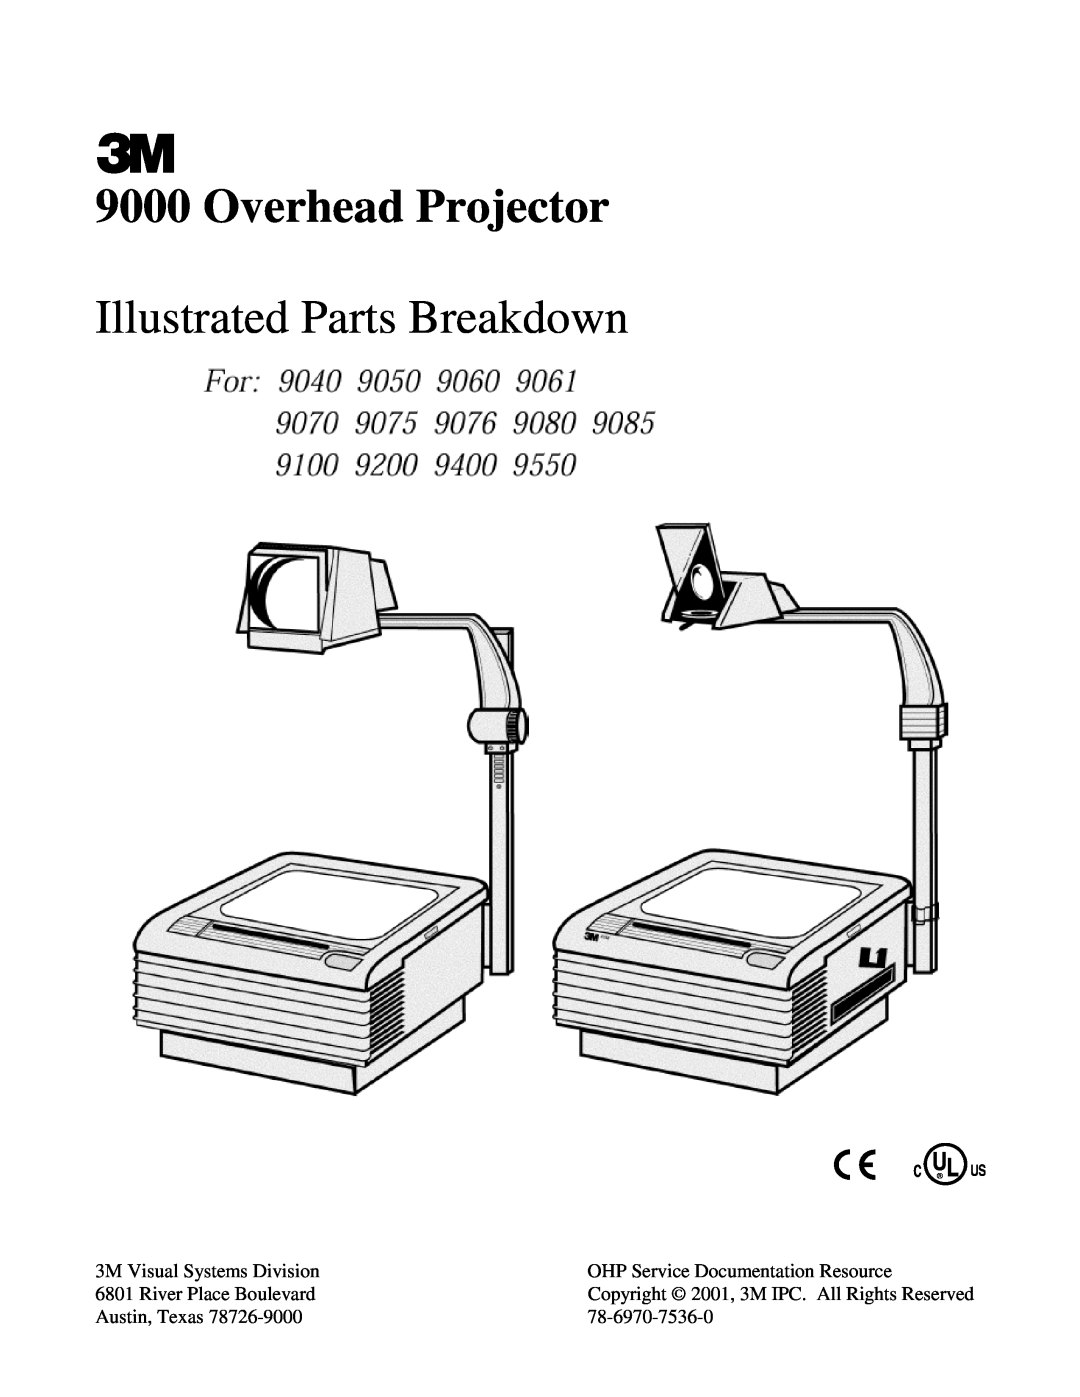 Xerox 9075, 9550 manual Overhead Projector, 3M Visual Systems Division, OHP Service Documentation Resource, Austin, Texas 